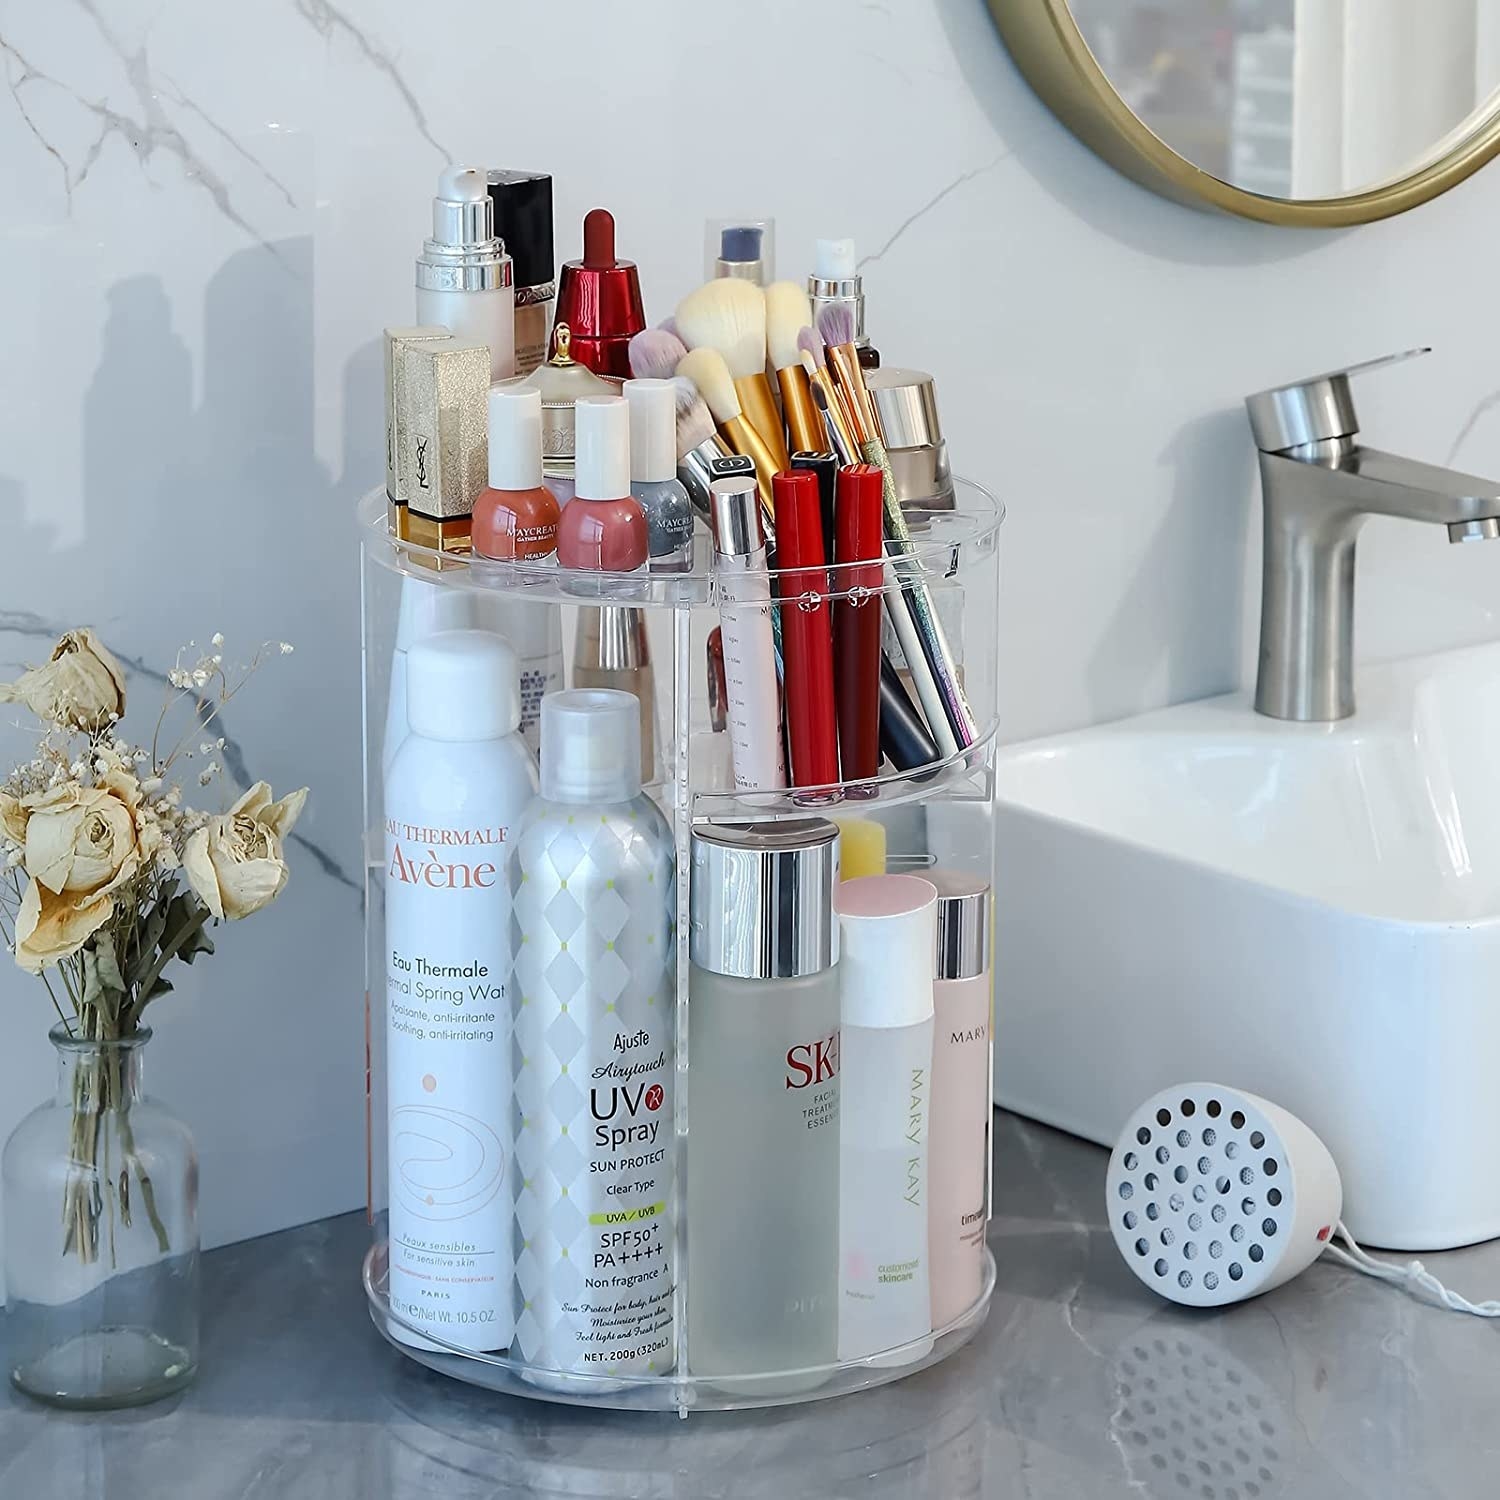 the organizer full of products on a bathroom counter